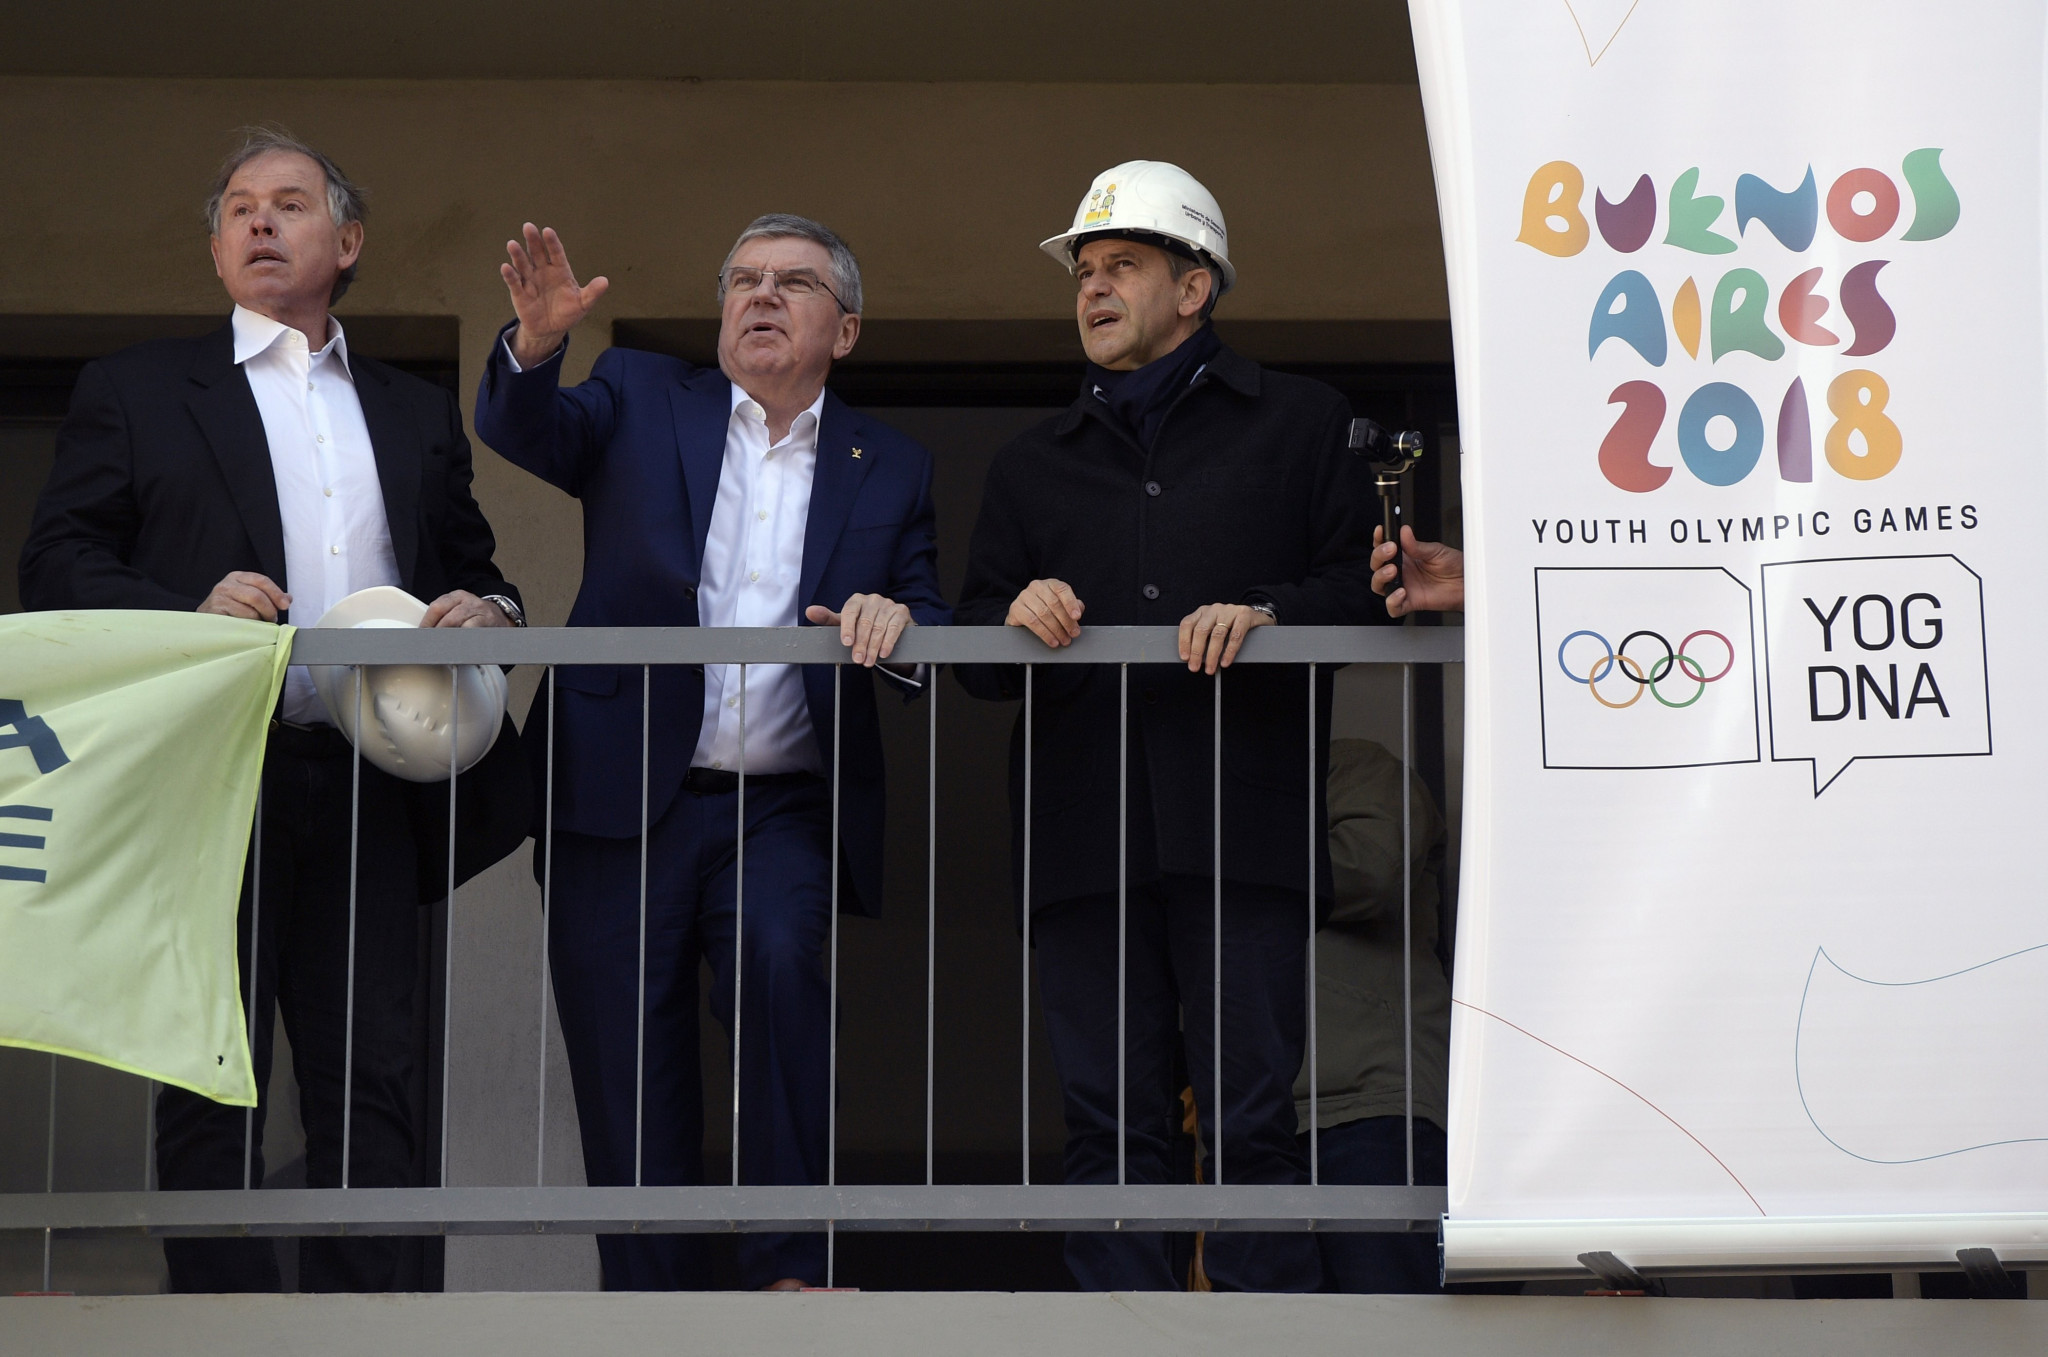 IOC President Thomas Bach visited Buenos Aires in April 2017 to check on preparations for the 2018 Summer Youth Olympic Games ©Getty Images